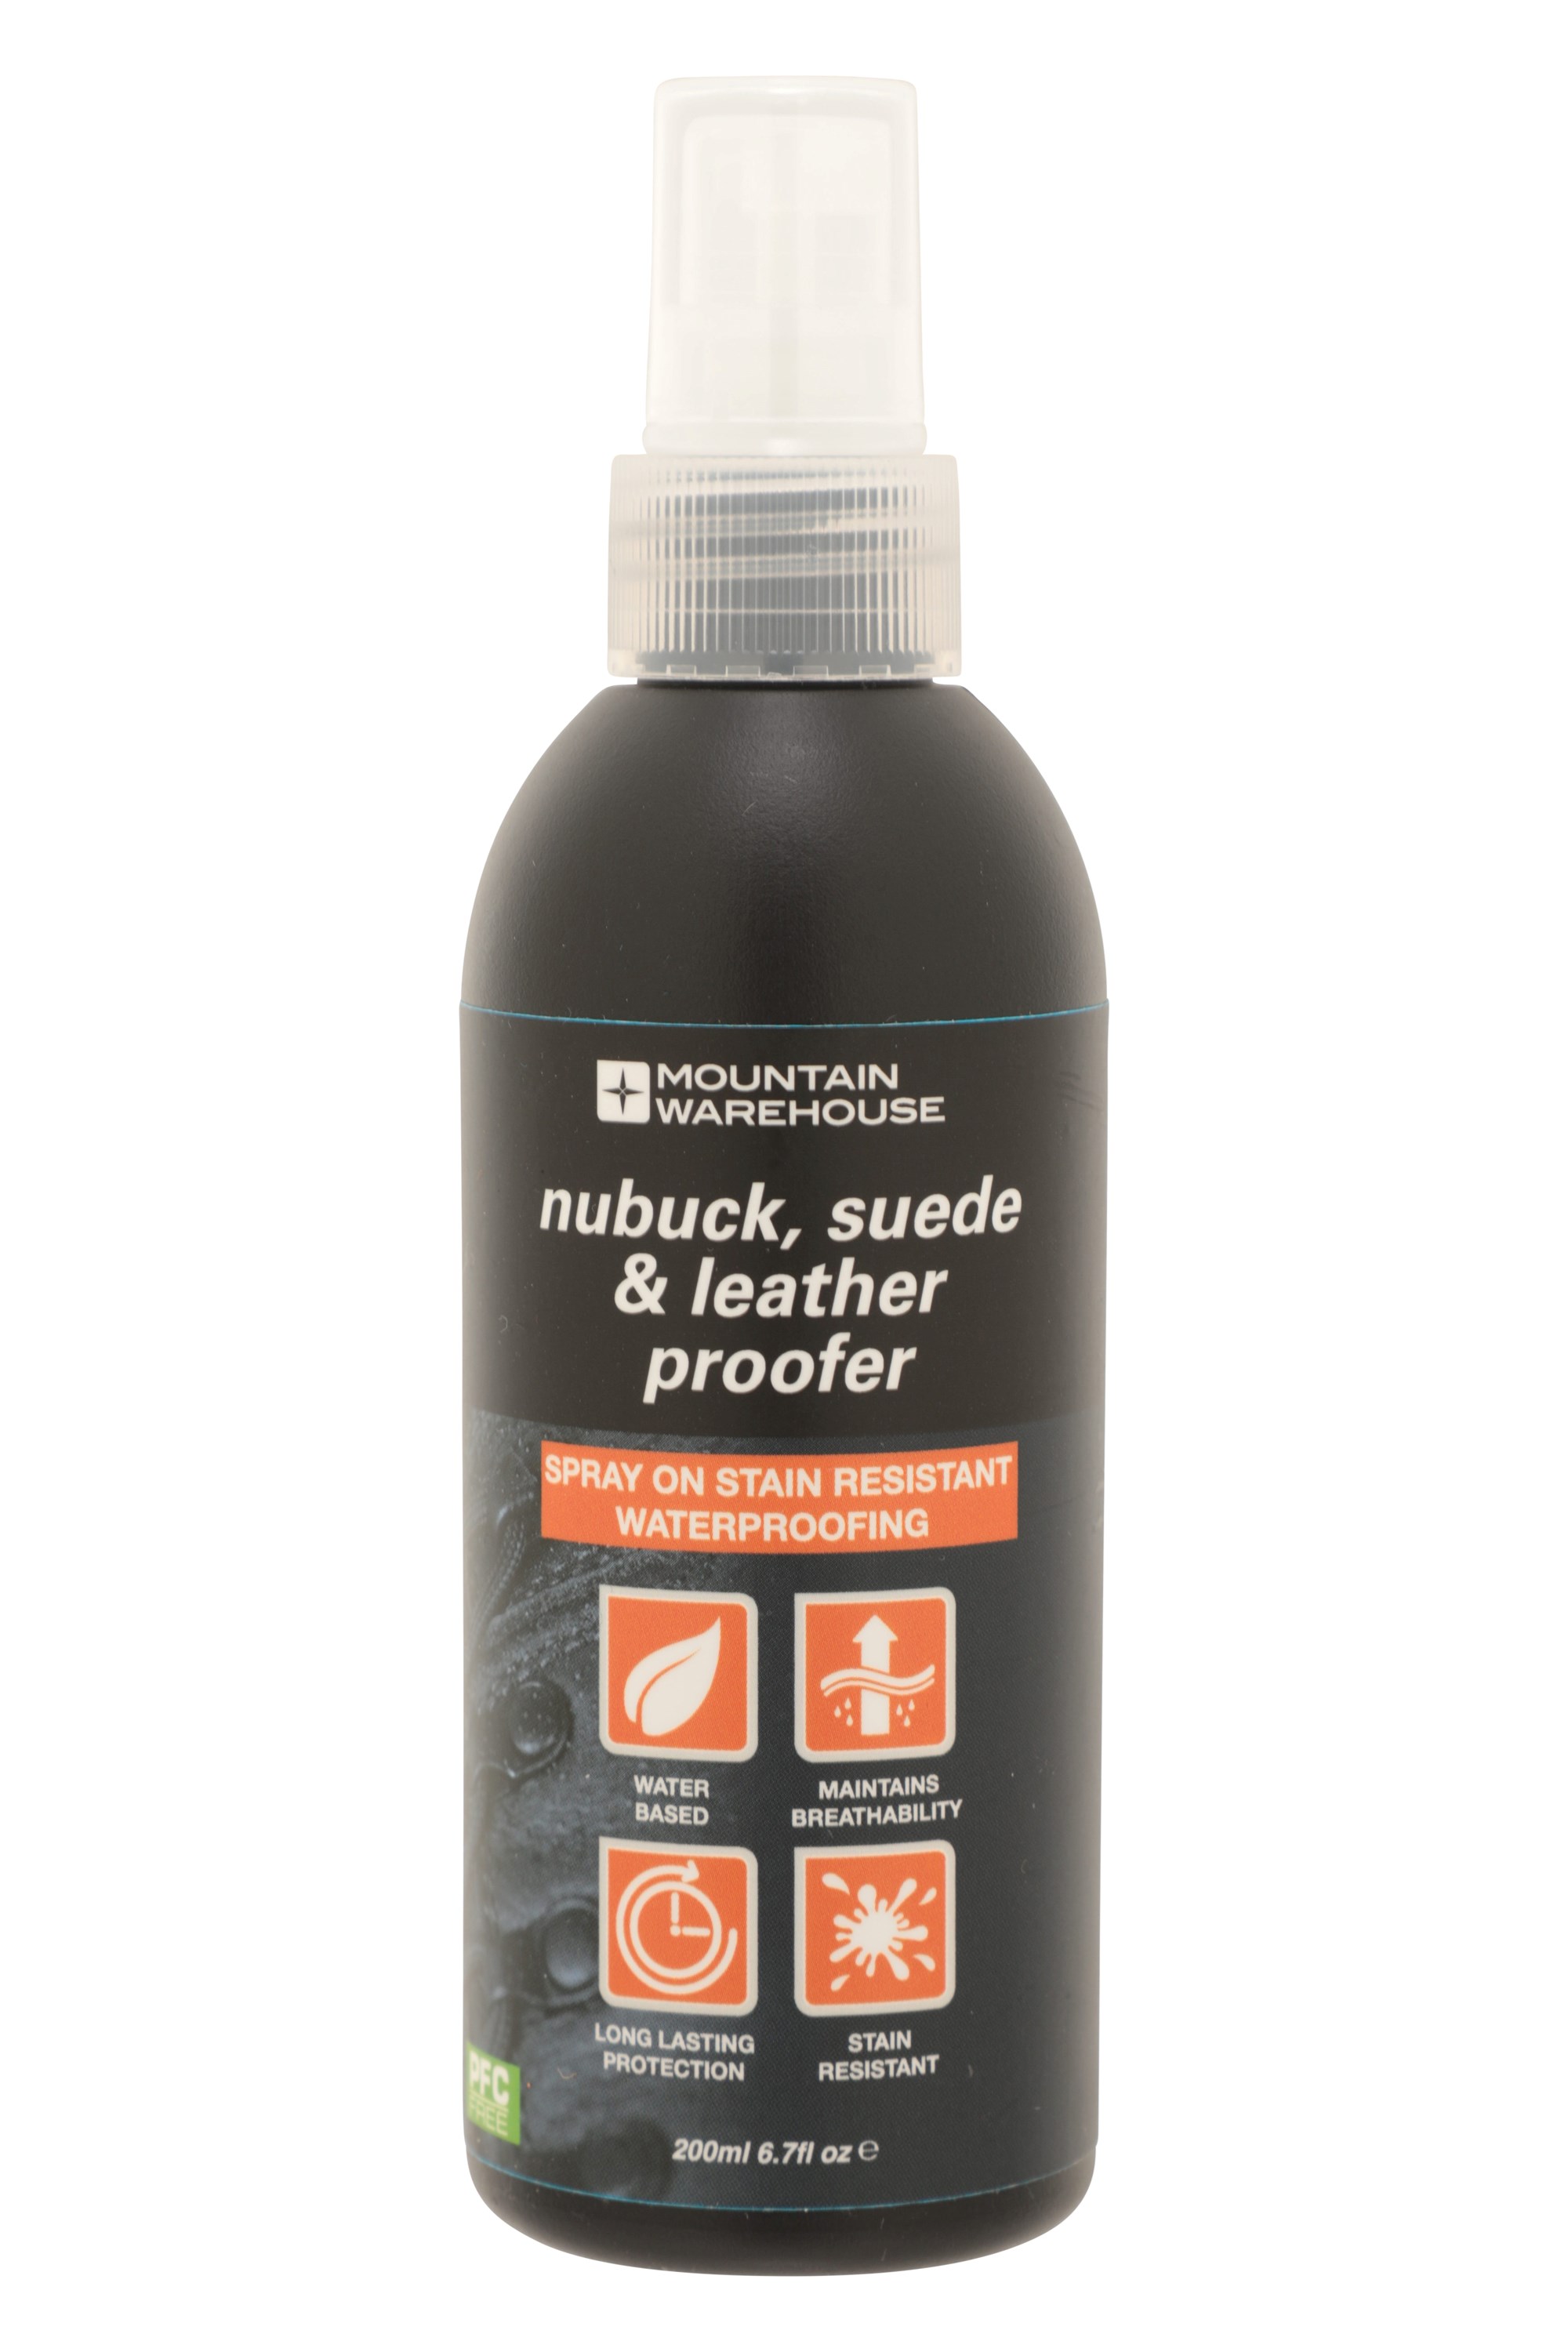 Nubuck And Suede Proofer - One